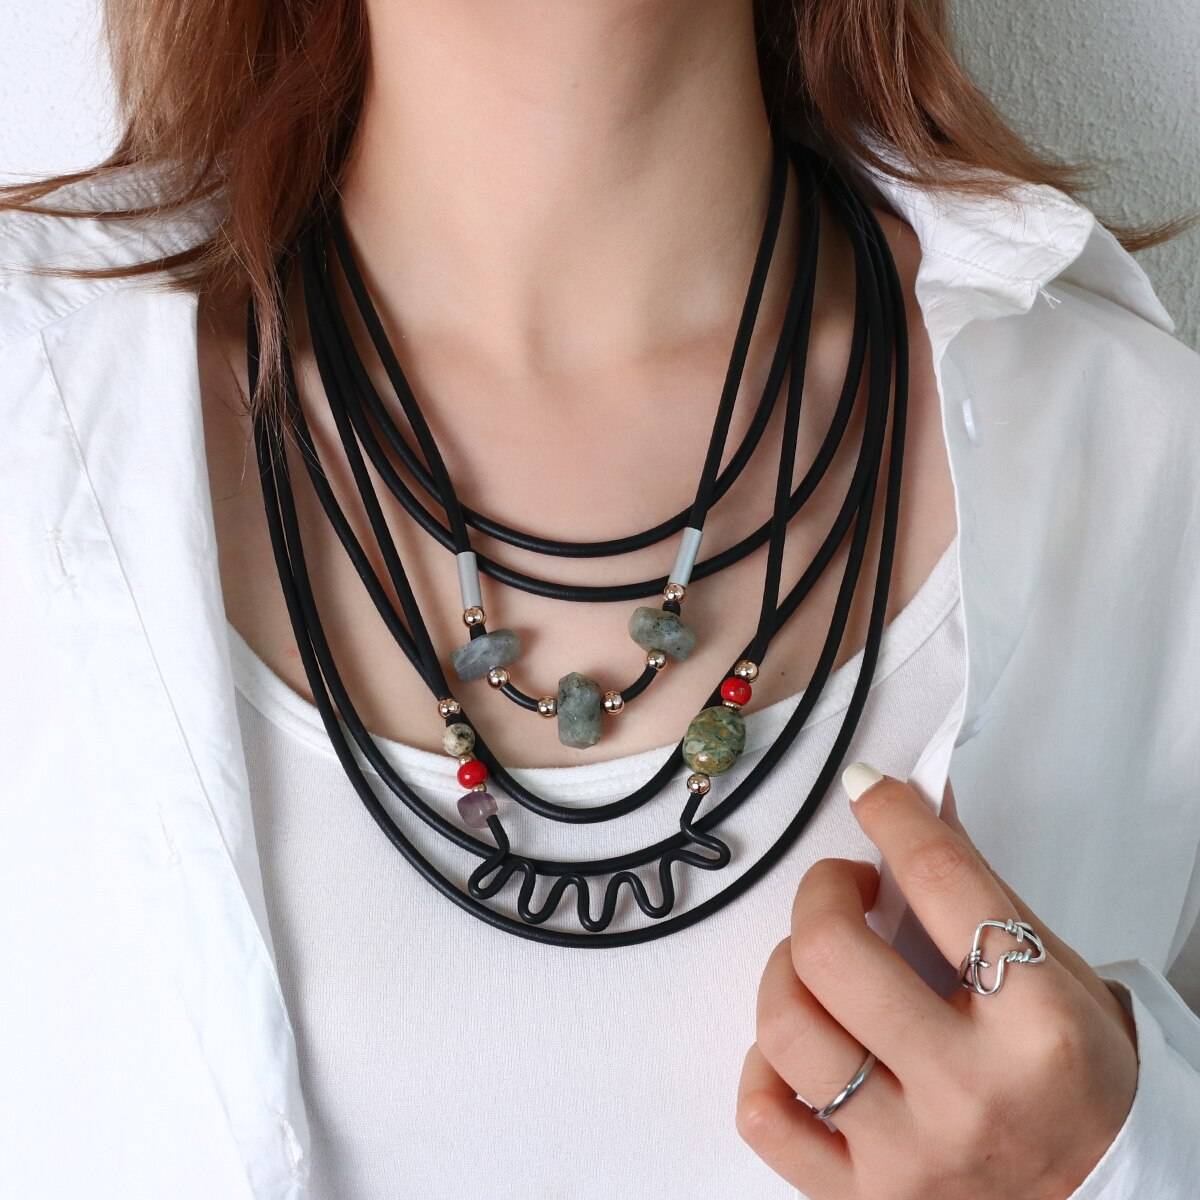 Amorcome Rubber Leather Necklace Ladies Gothic Sweater Chain Necklaces with Geometric Natural Stone Jewelry Collier Femme Uncategorized 8d255f28538fbae46aeae7: Black